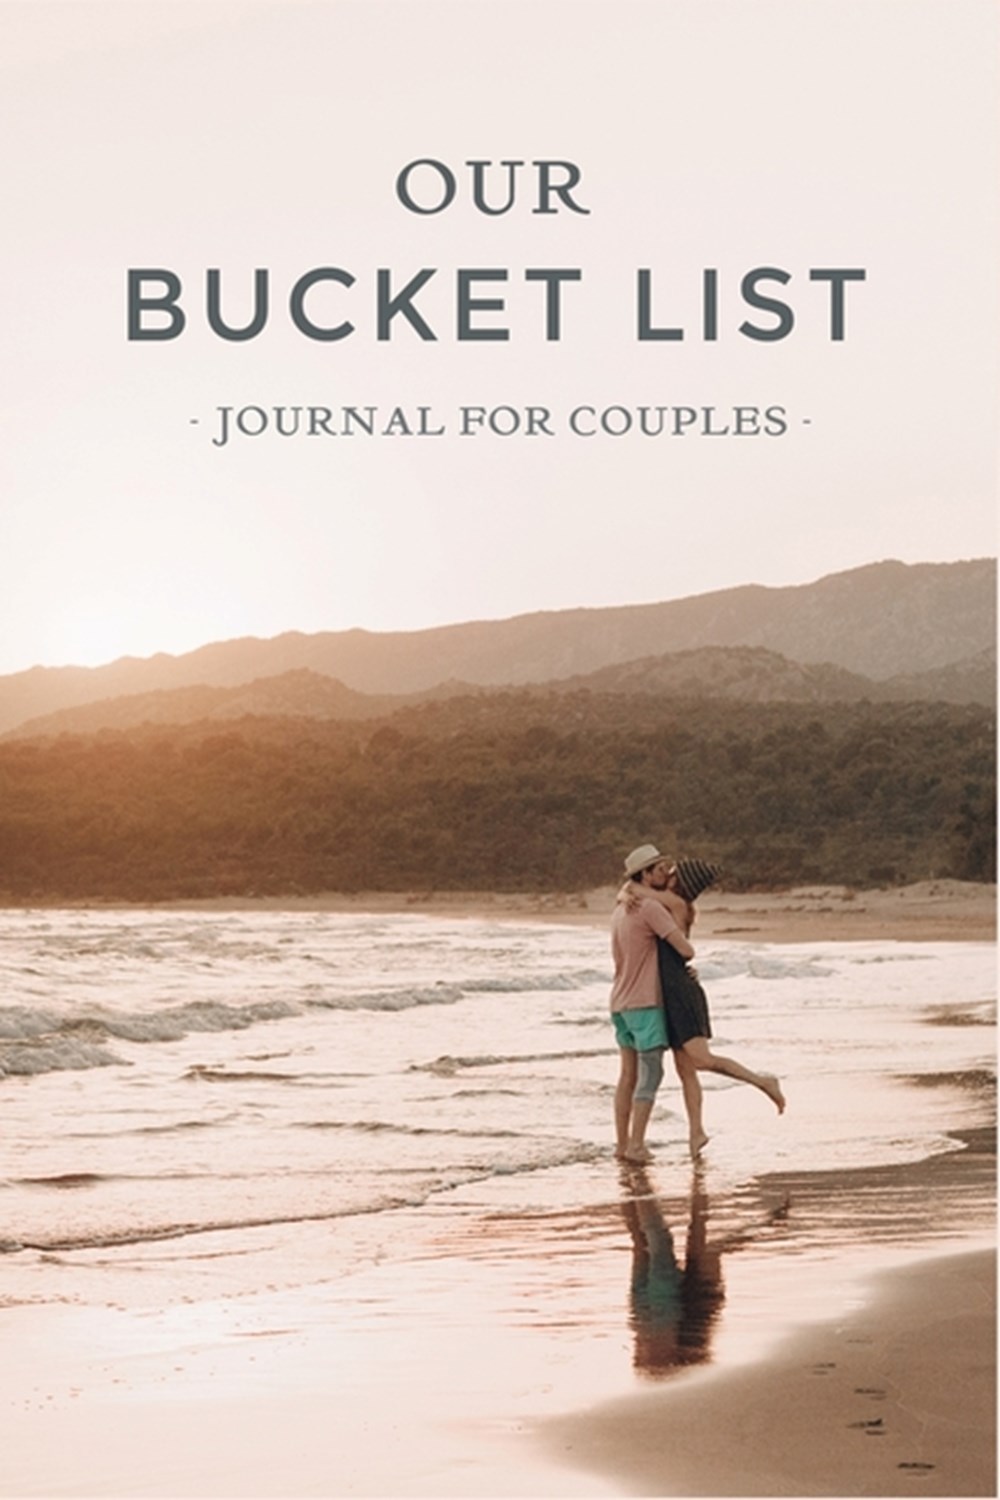 Our Bucket List - Journal for Couples in Paperback by Lydia